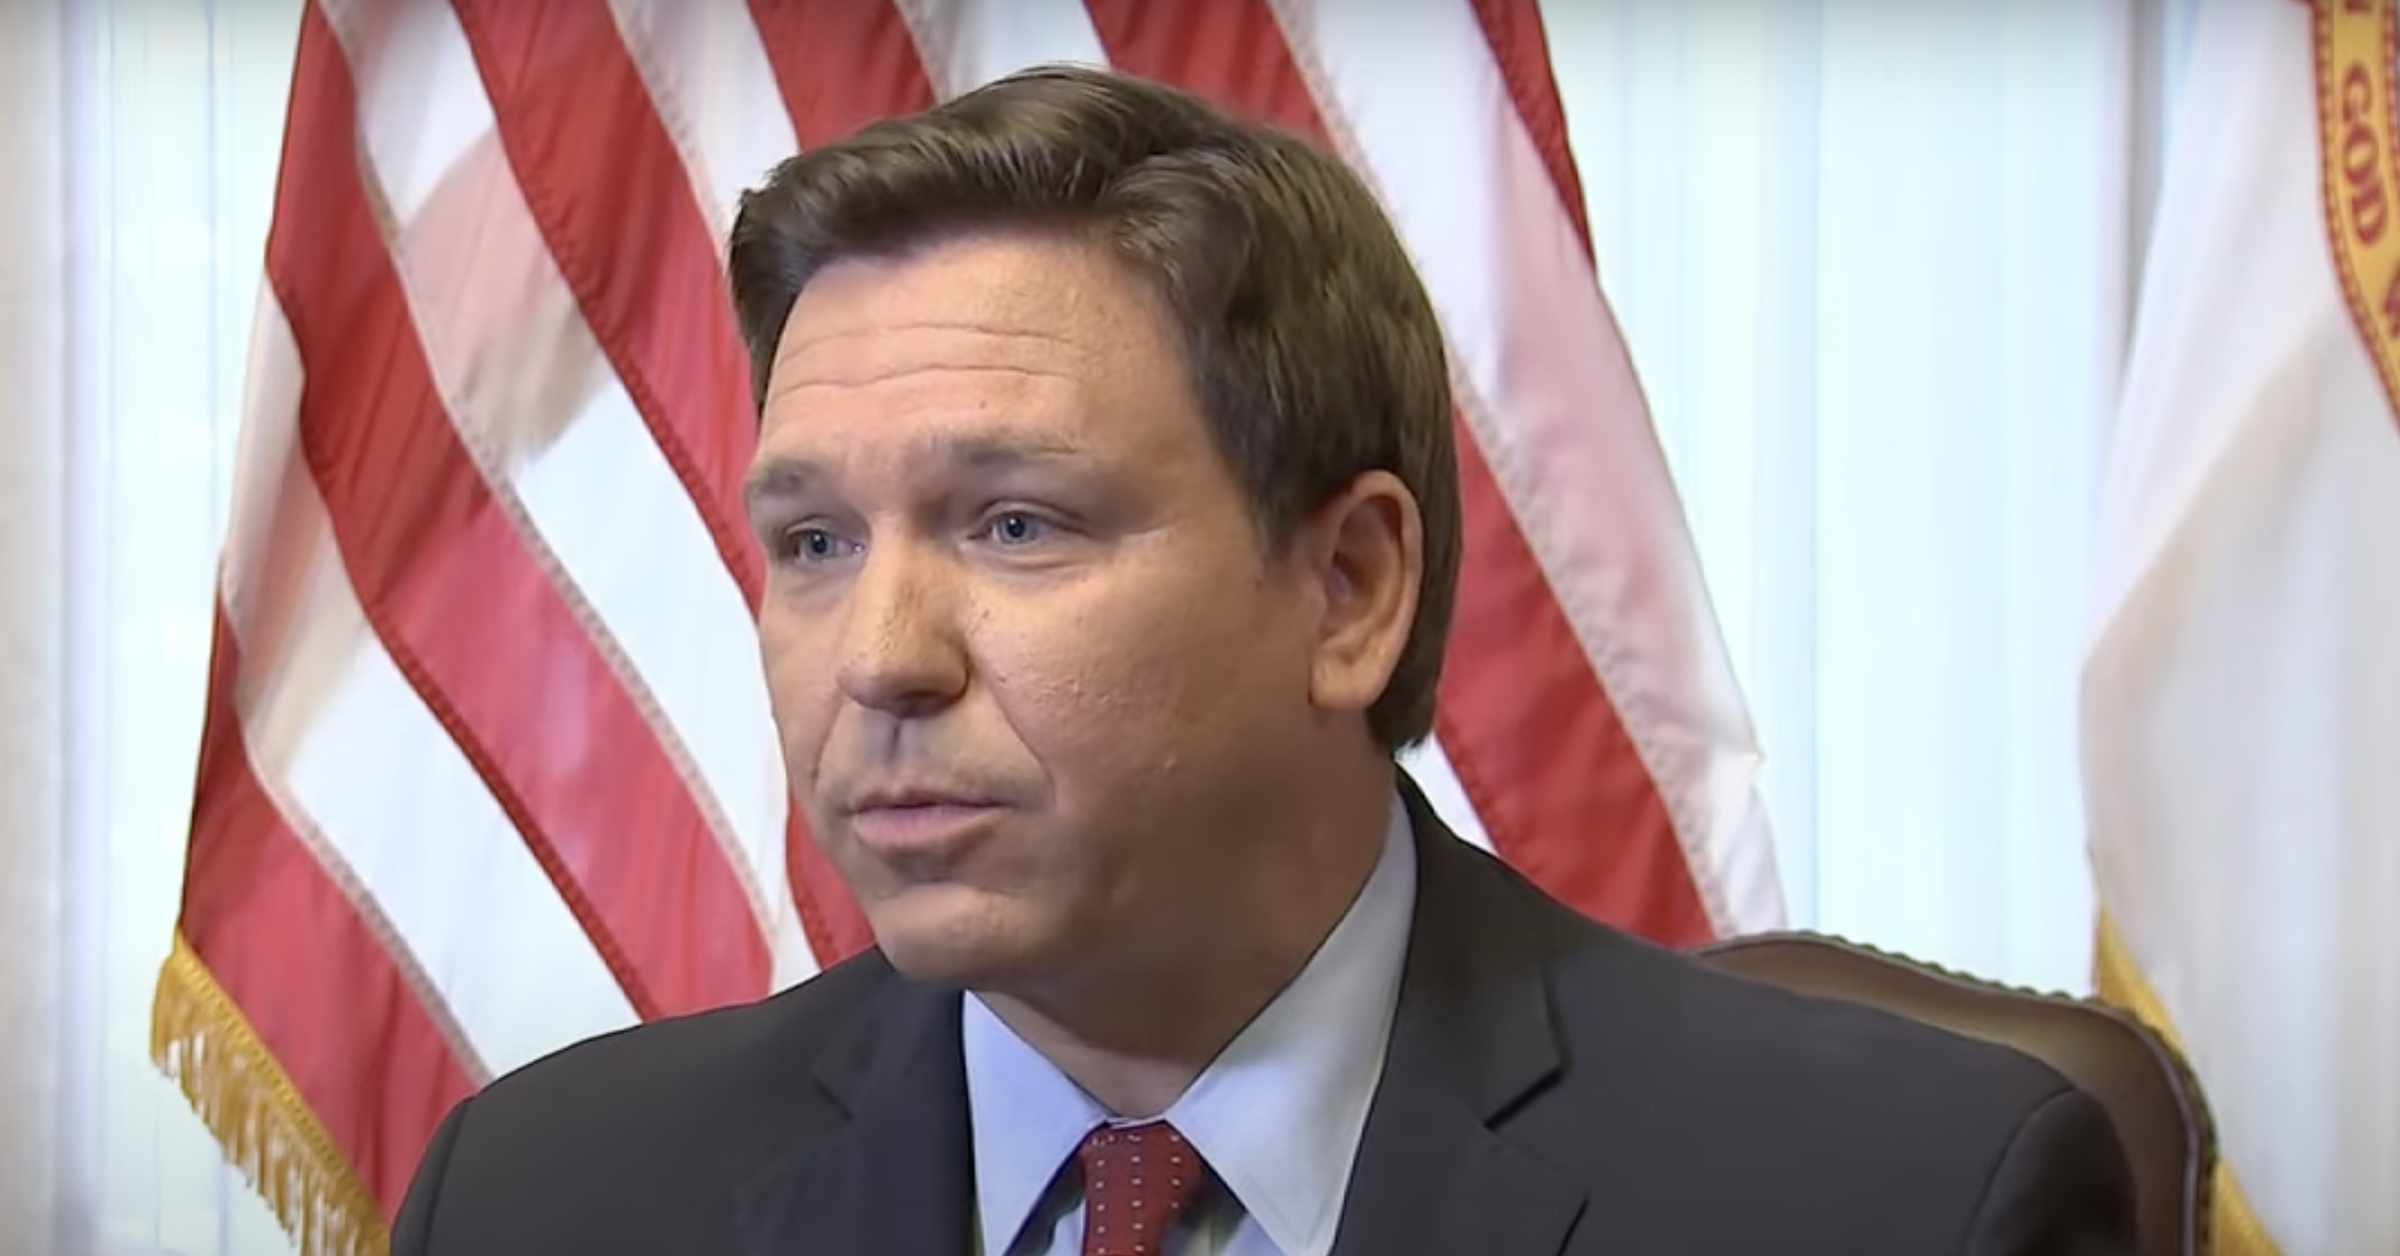 DeSantis ‘Mused’ He Was Jealous of Abbott’s ‘Good Political Fortune’ to be on the Southern Border: Report